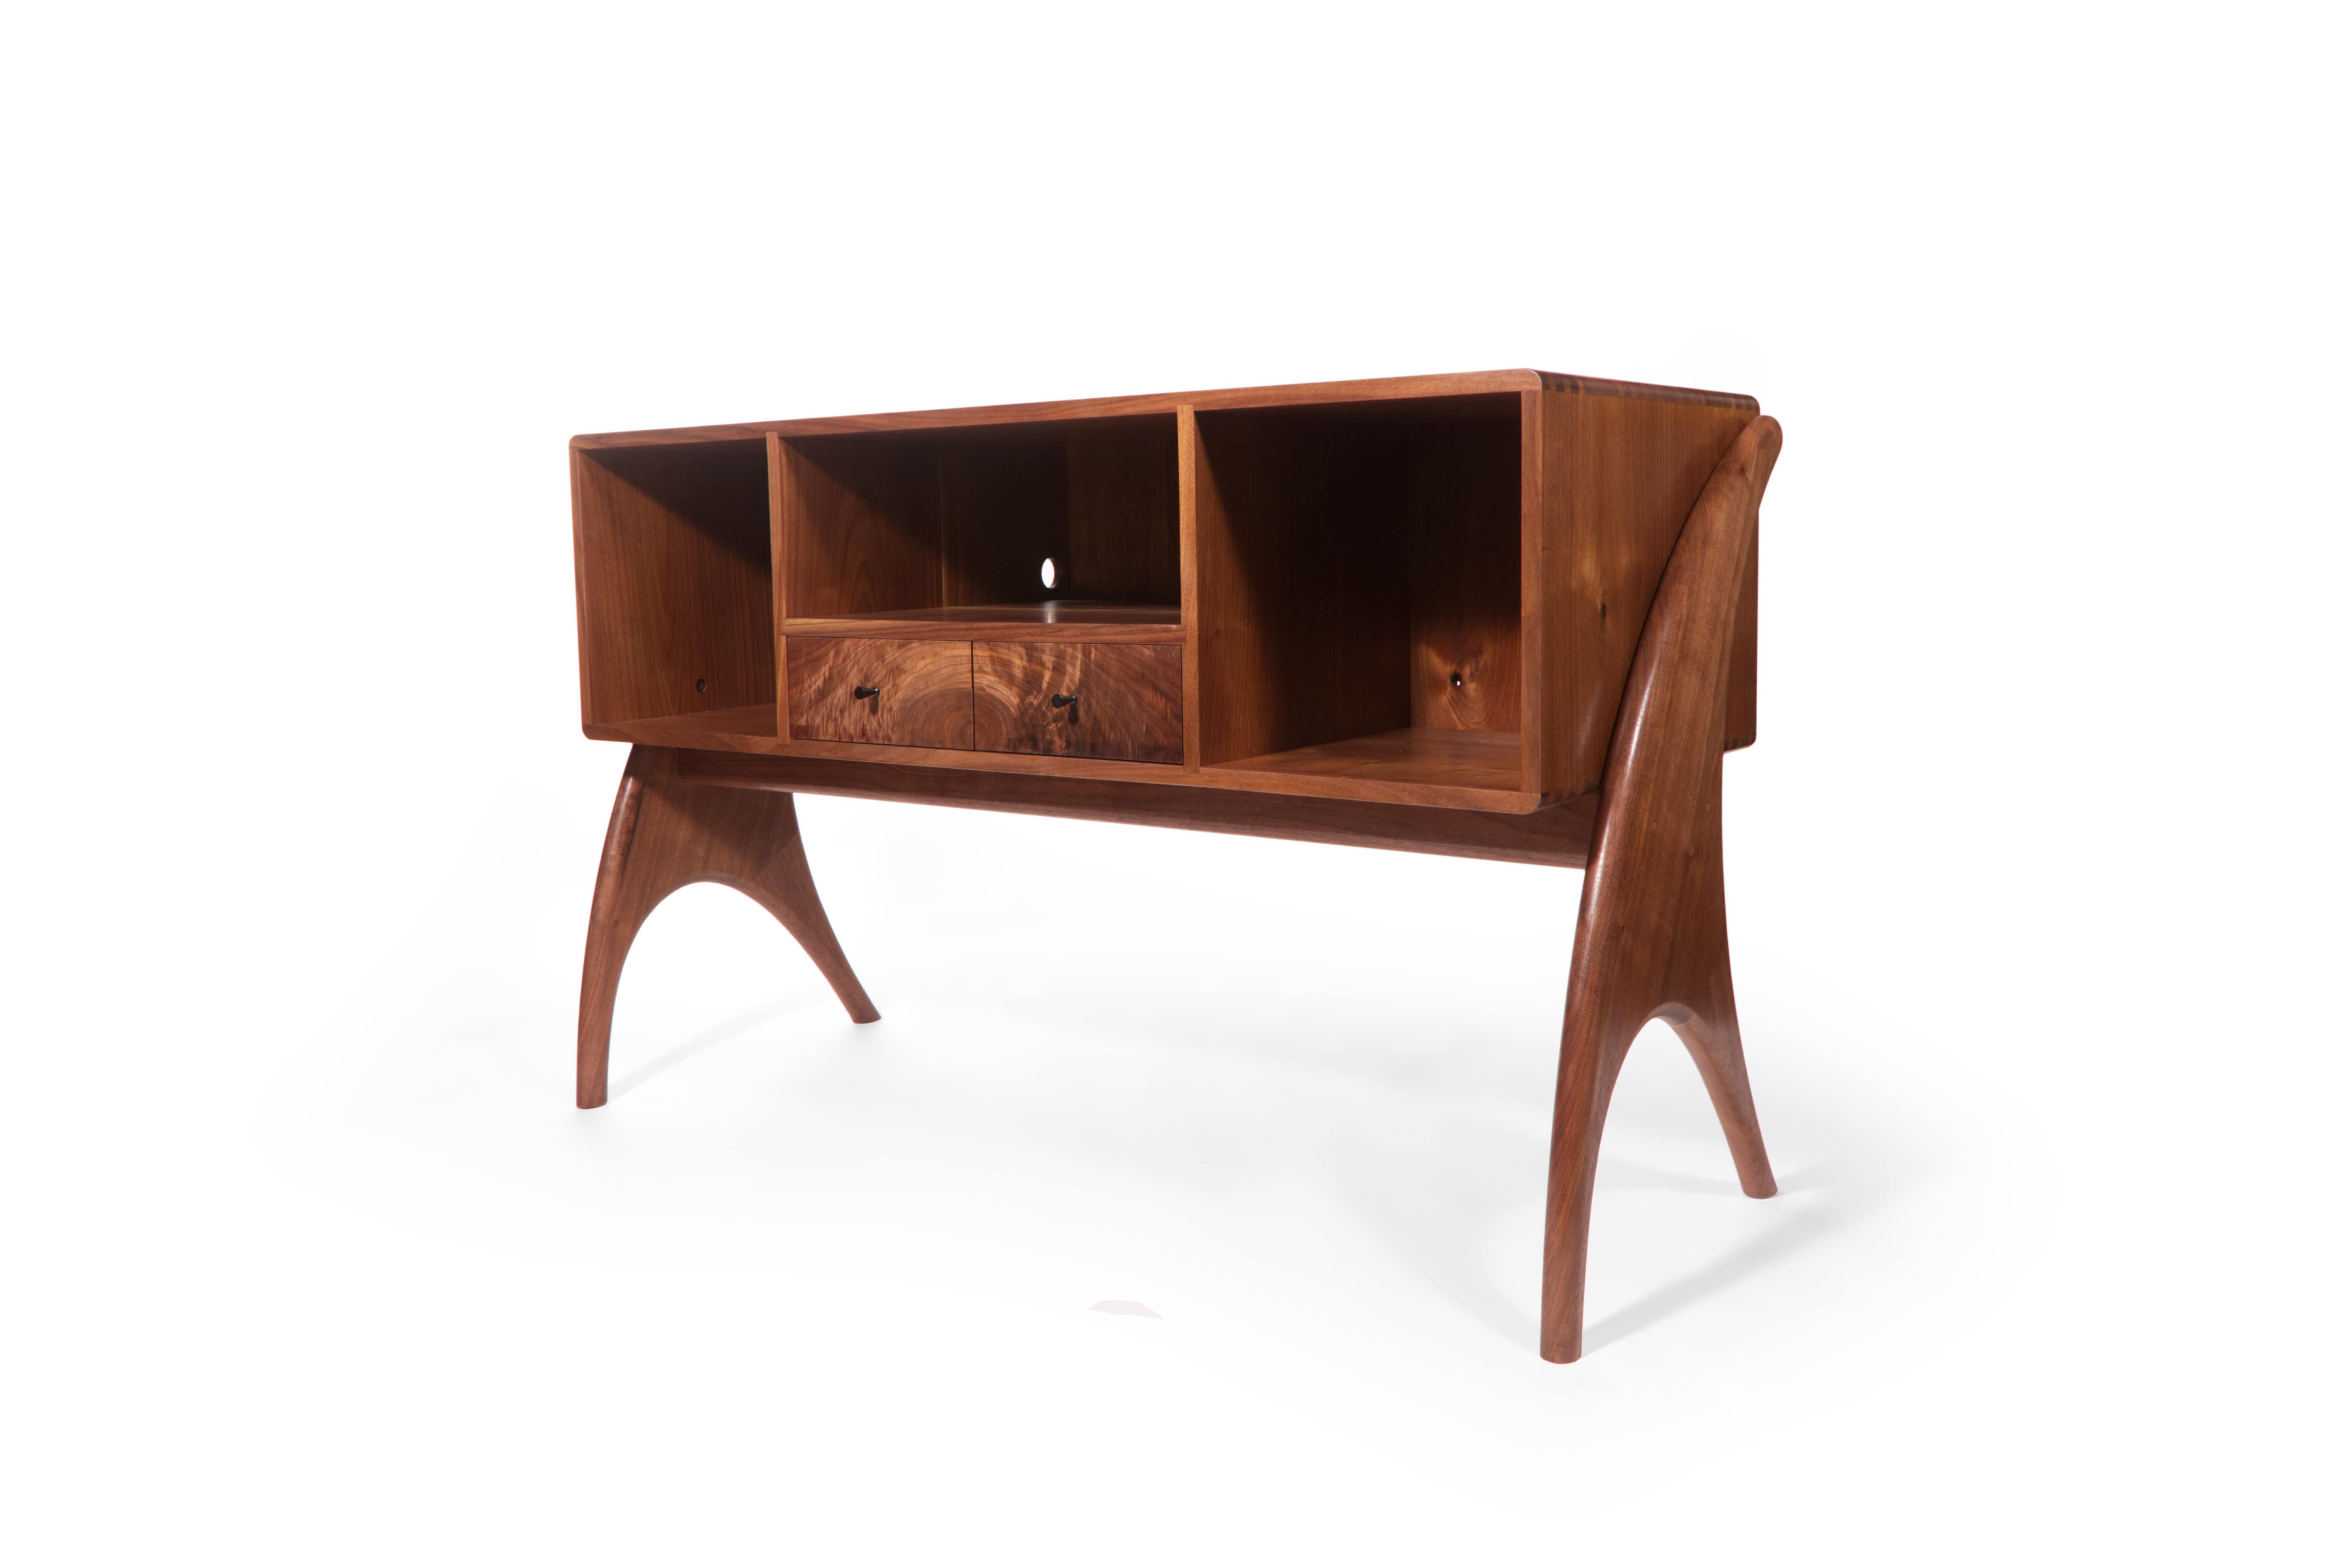 House your music collection in something beautiful! Handcrafted from solid black walnut, my midcentury record cabinet is designed to house your equipment and records in one place. With long curving legs and incredible hand-cut dovetail joinery, this